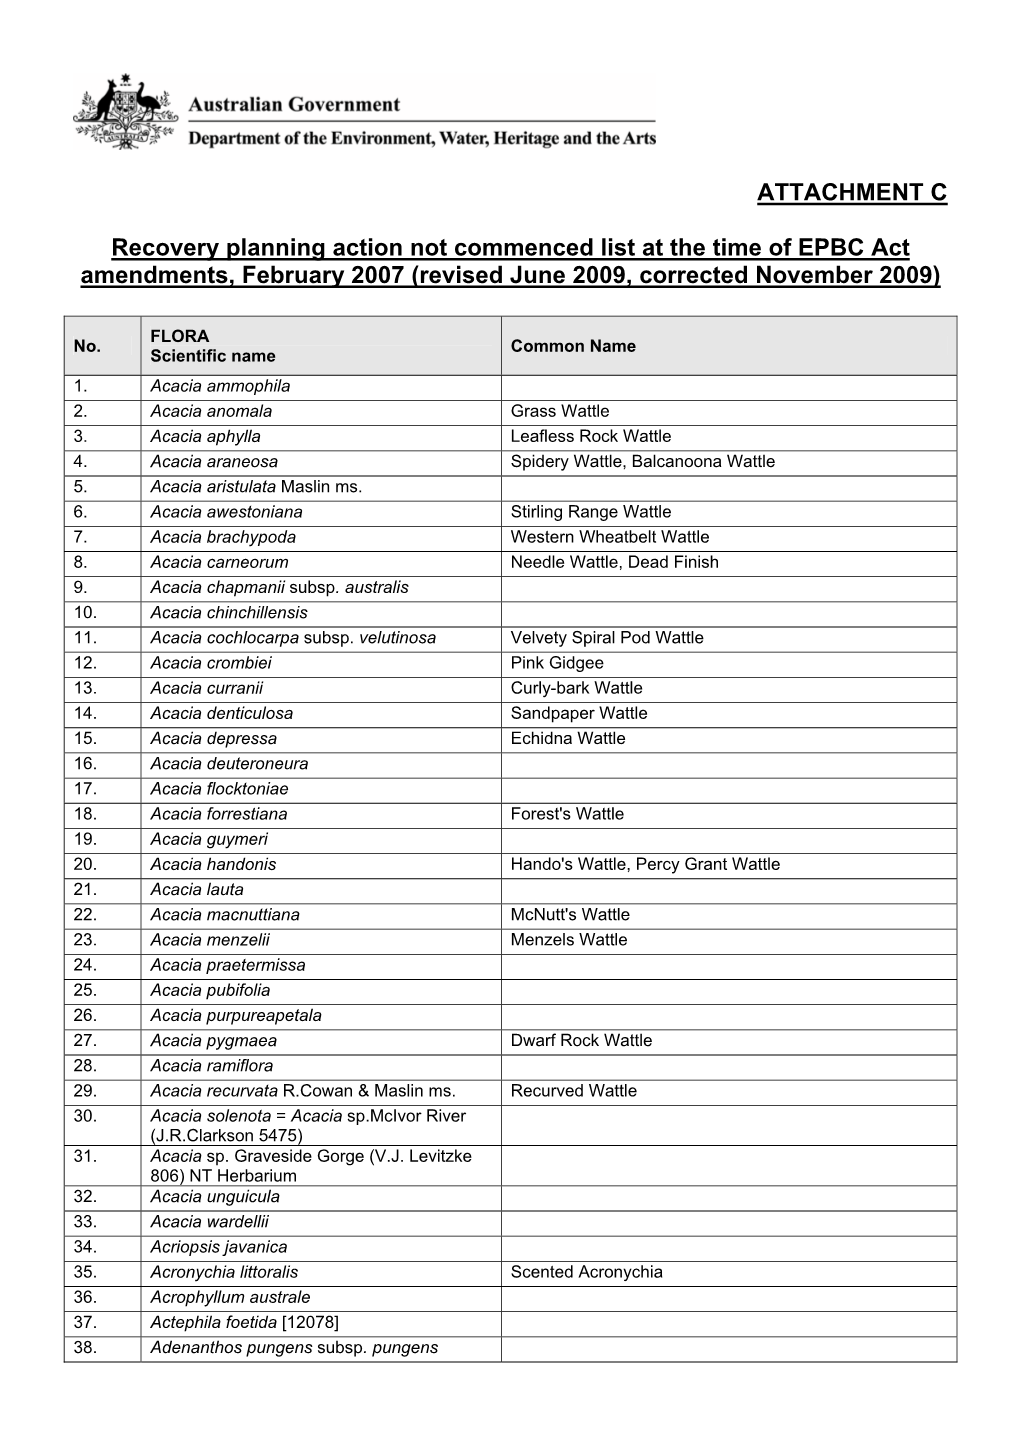 Recovery Planning Action Not Commenced List at the Time of EPBC Act Amendments, February 2007 (Revised June 2009, Corrected November 2009)